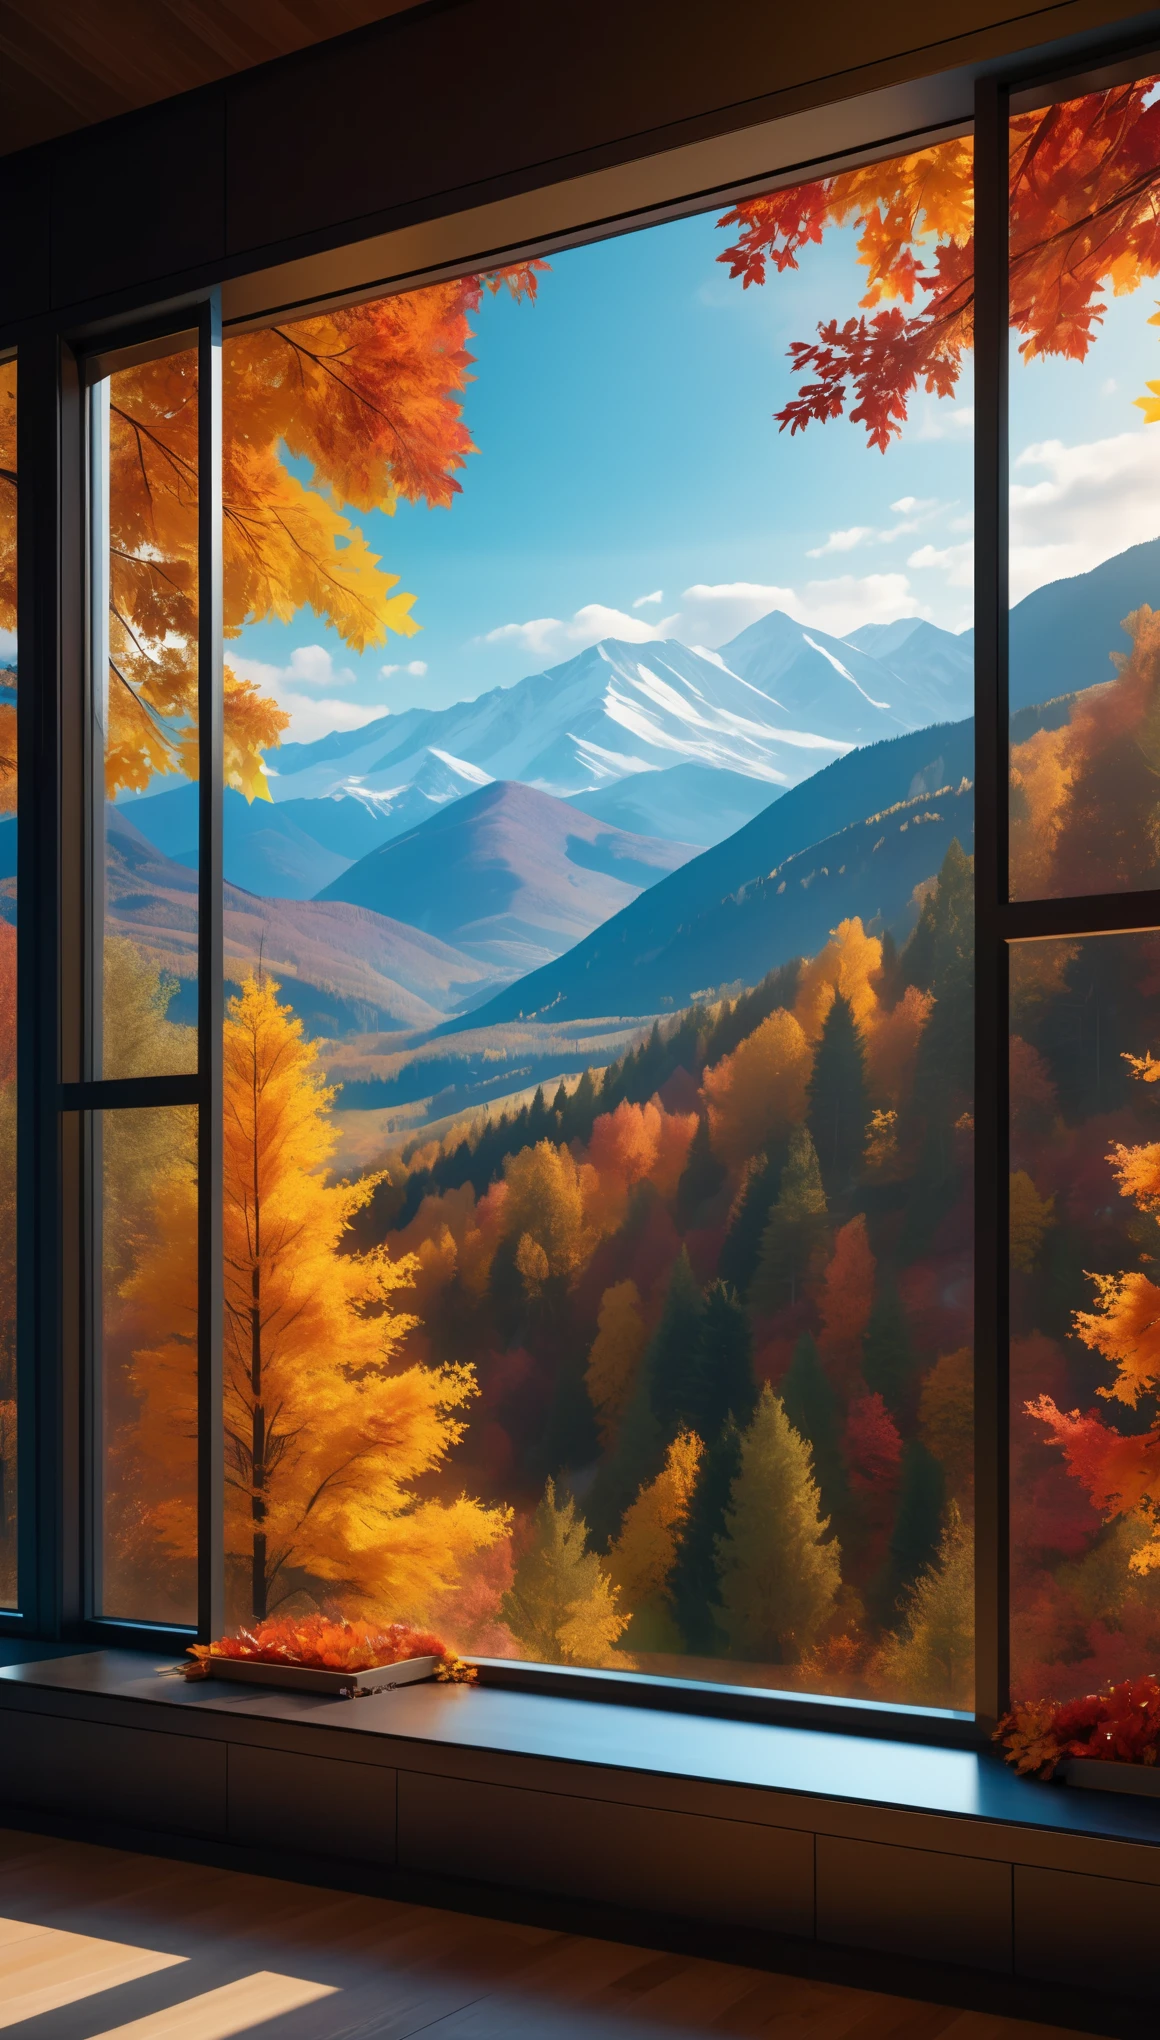 a window of a futuristic house opens,outside the window is an autumn scenery with colorful leaves,mountains and forests,8k,contrast between light and dark tones,masterpiece